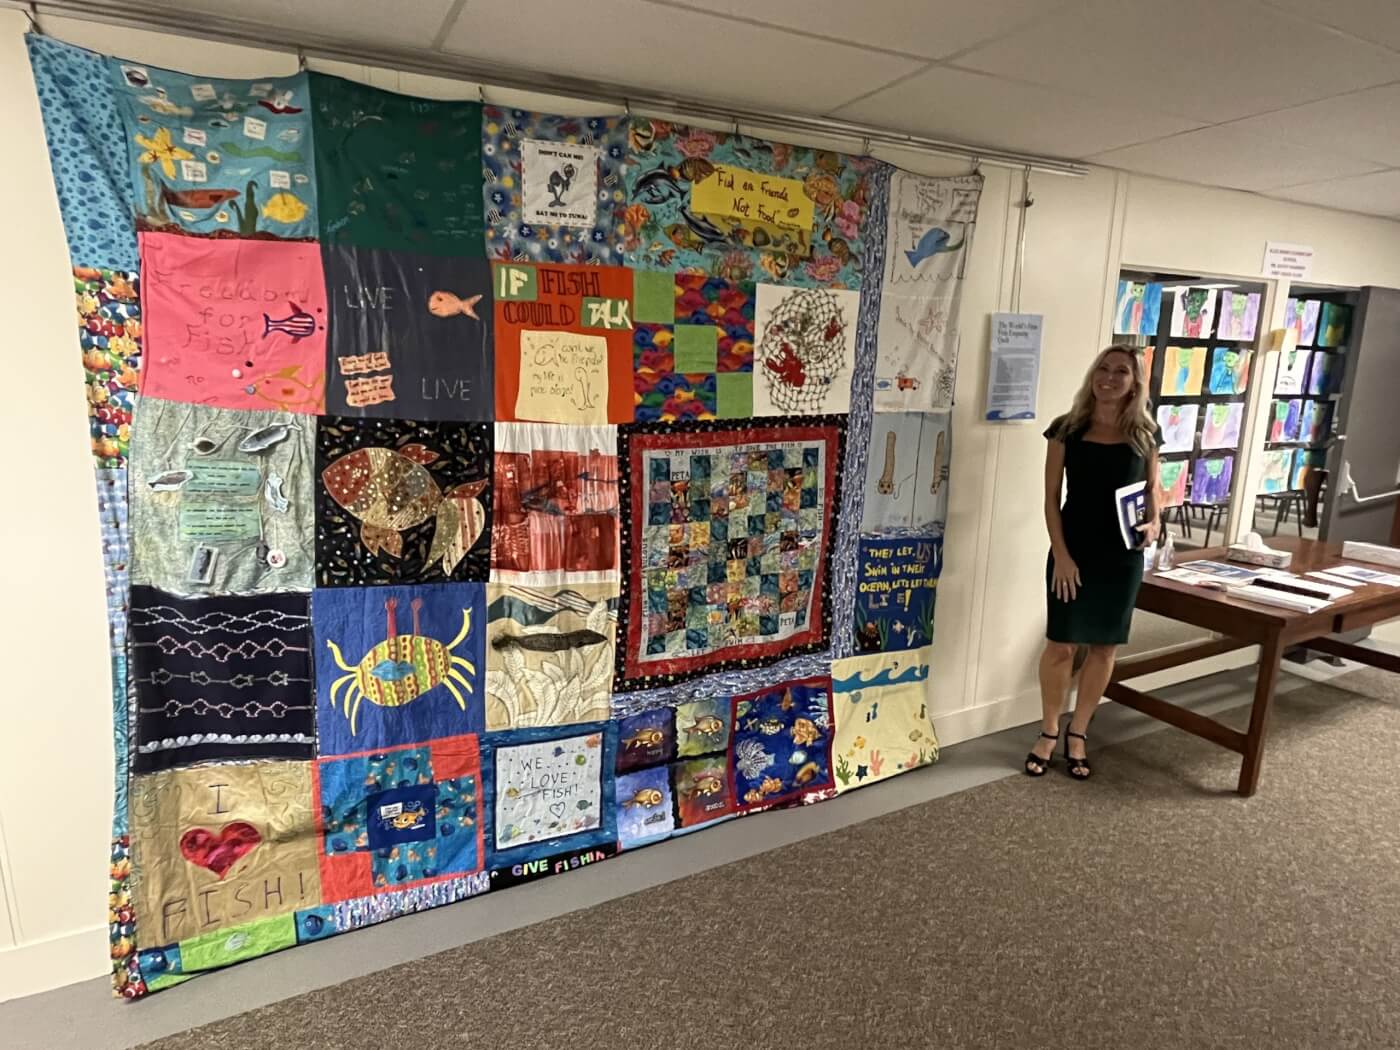 PETA Staffer Ashley stands next to the fish empathy quilt